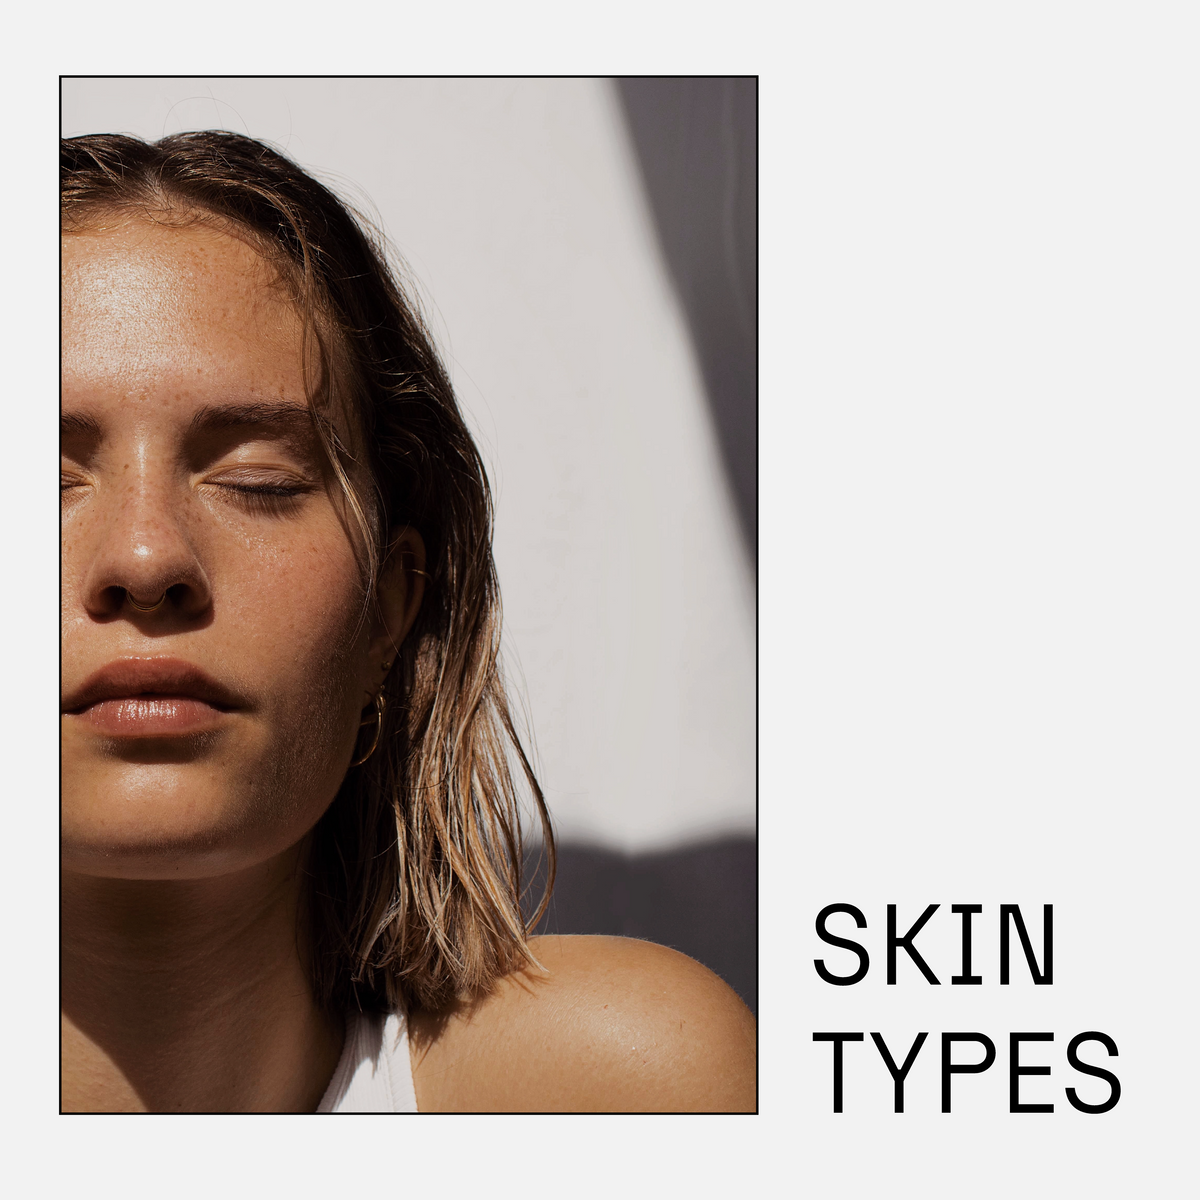 Let's Talk About Skin Types - Part One